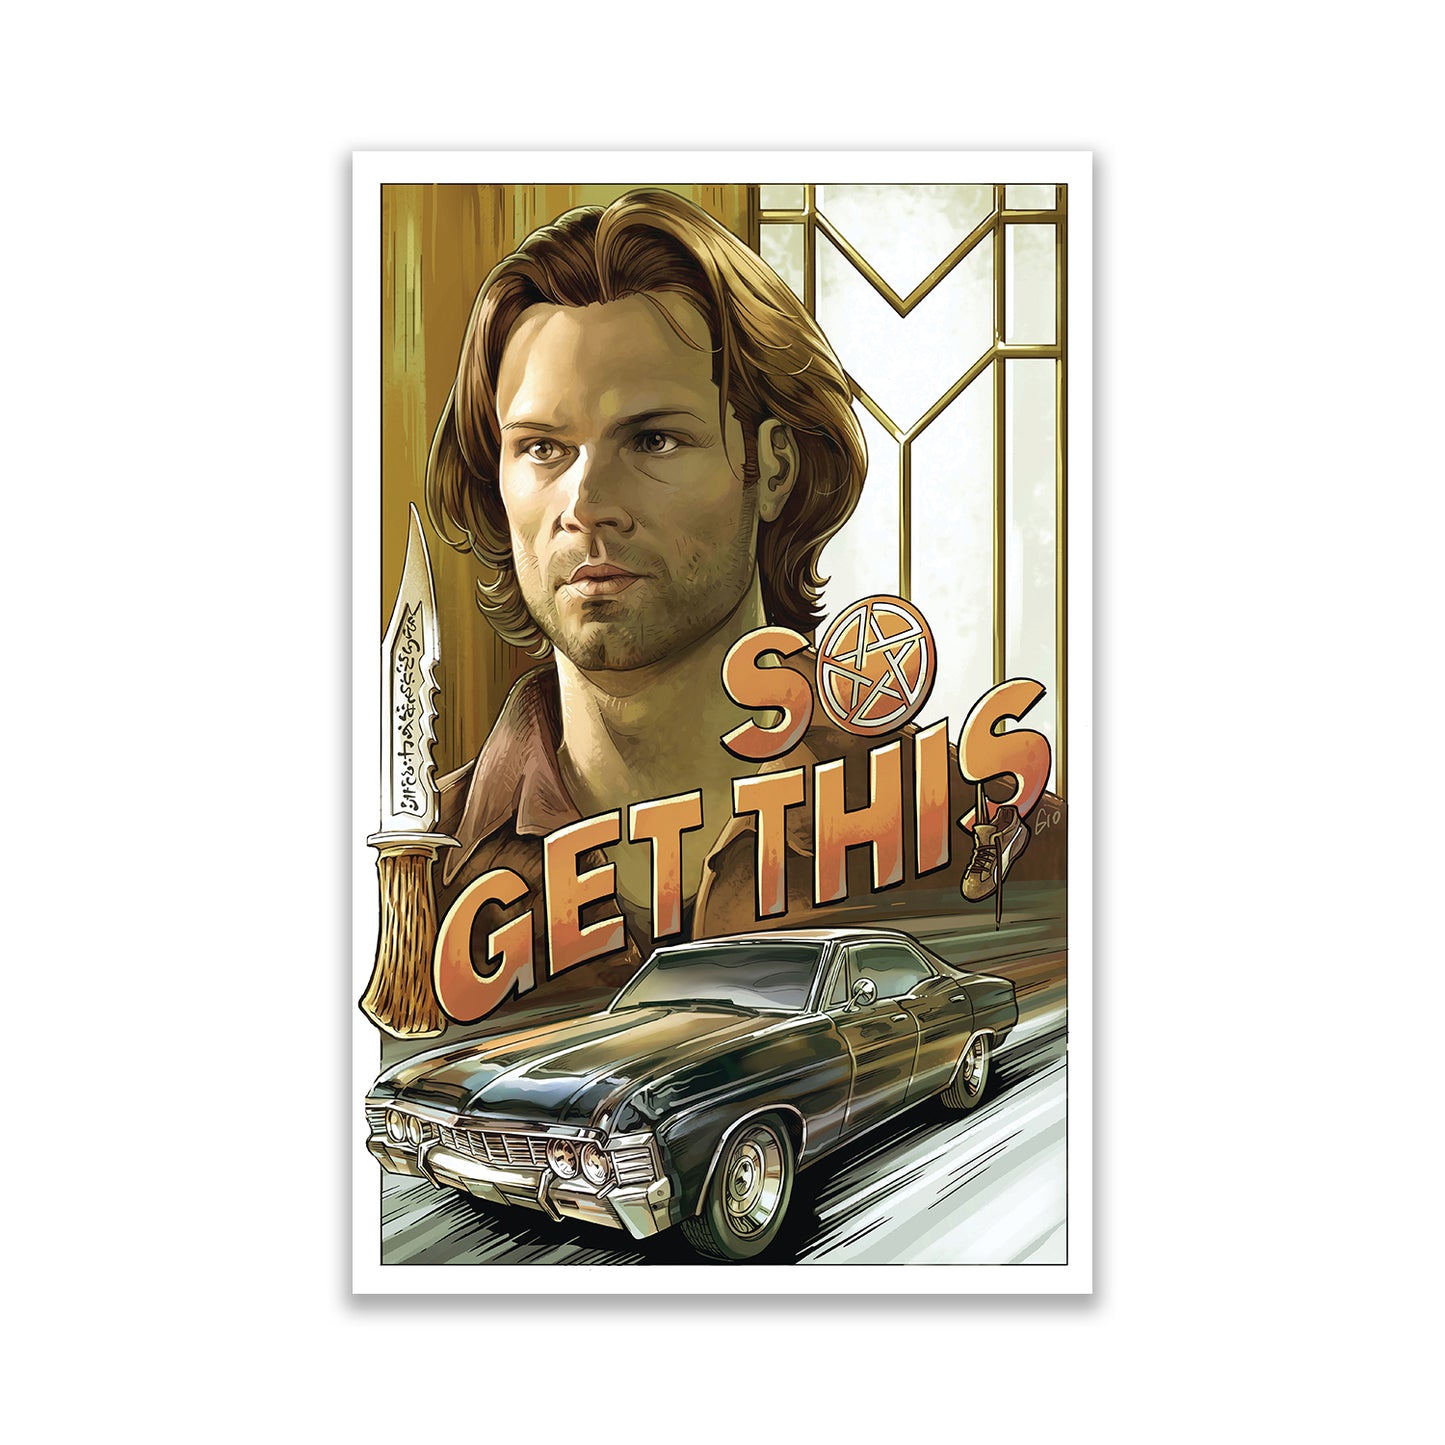 A drawing of Sam Winchester's face. Under the face is a 1967 Chevy Impala, with orand text above it saying "so get this." The O in the text contains the anti-possession symbol.